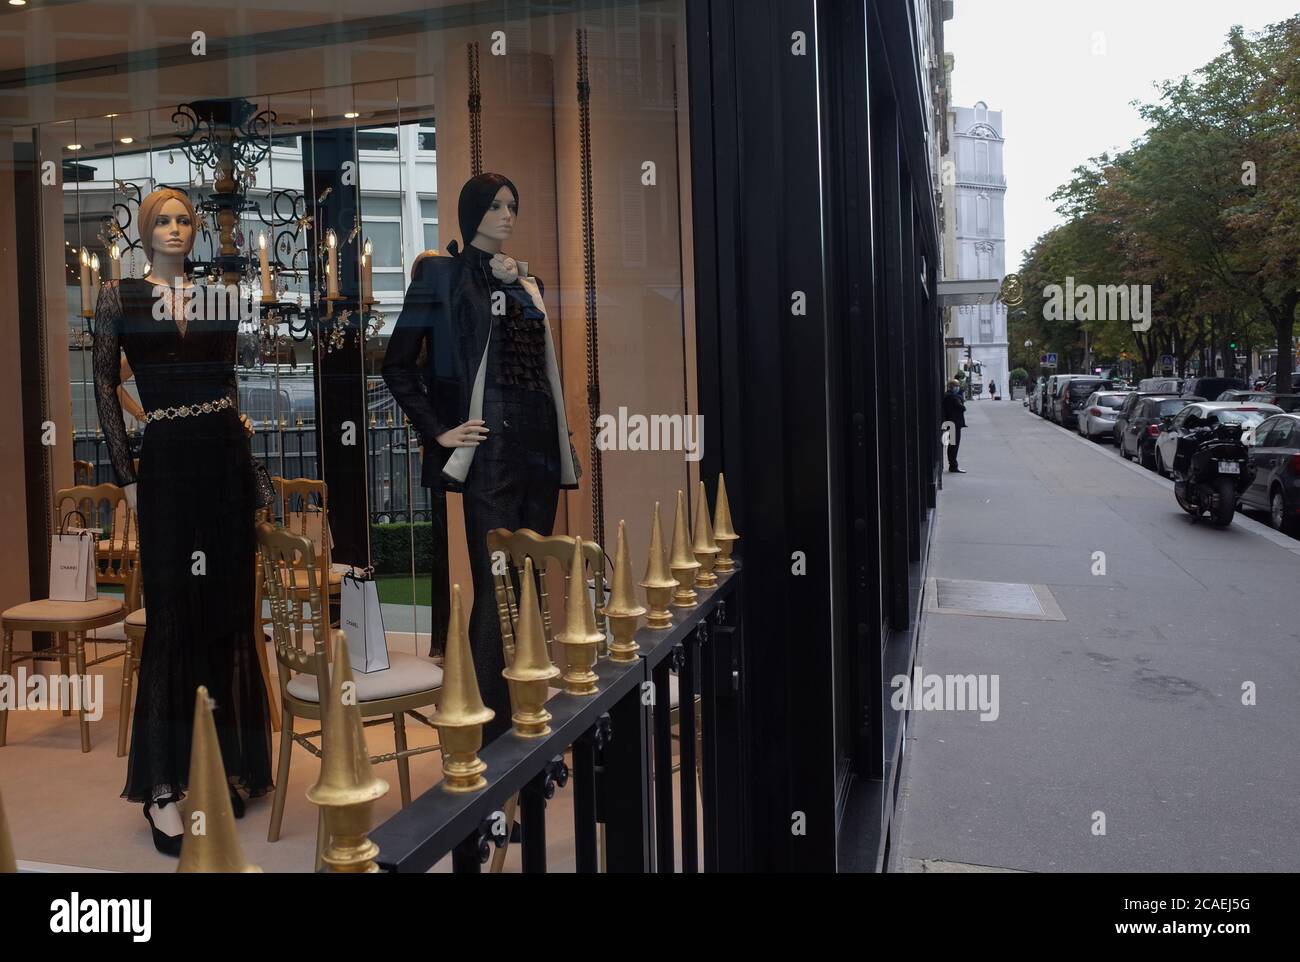 *** STRICTLY NO SALES TO FRENCH MEDIA OR PUBLISHERS - RIGHTS RESERVED ***August 03, 2020 - Paris, France: The front of the Louis Vuitton store in avenue Montaigne, a street lined with luxury stores. Luxury brand stores in Paris are badly affected by Covid crisis, with wealthy tourists staying away due to travel restrictions and coronavirus fears. La facade de la boutique Louis Vuitton sur l'avenue Montaigne. Les boutiques de luxe font face a une chute de leur clientele traditionnelle du fait de la crise du Covid-19 et des restrictions de voyage. Stock Photo